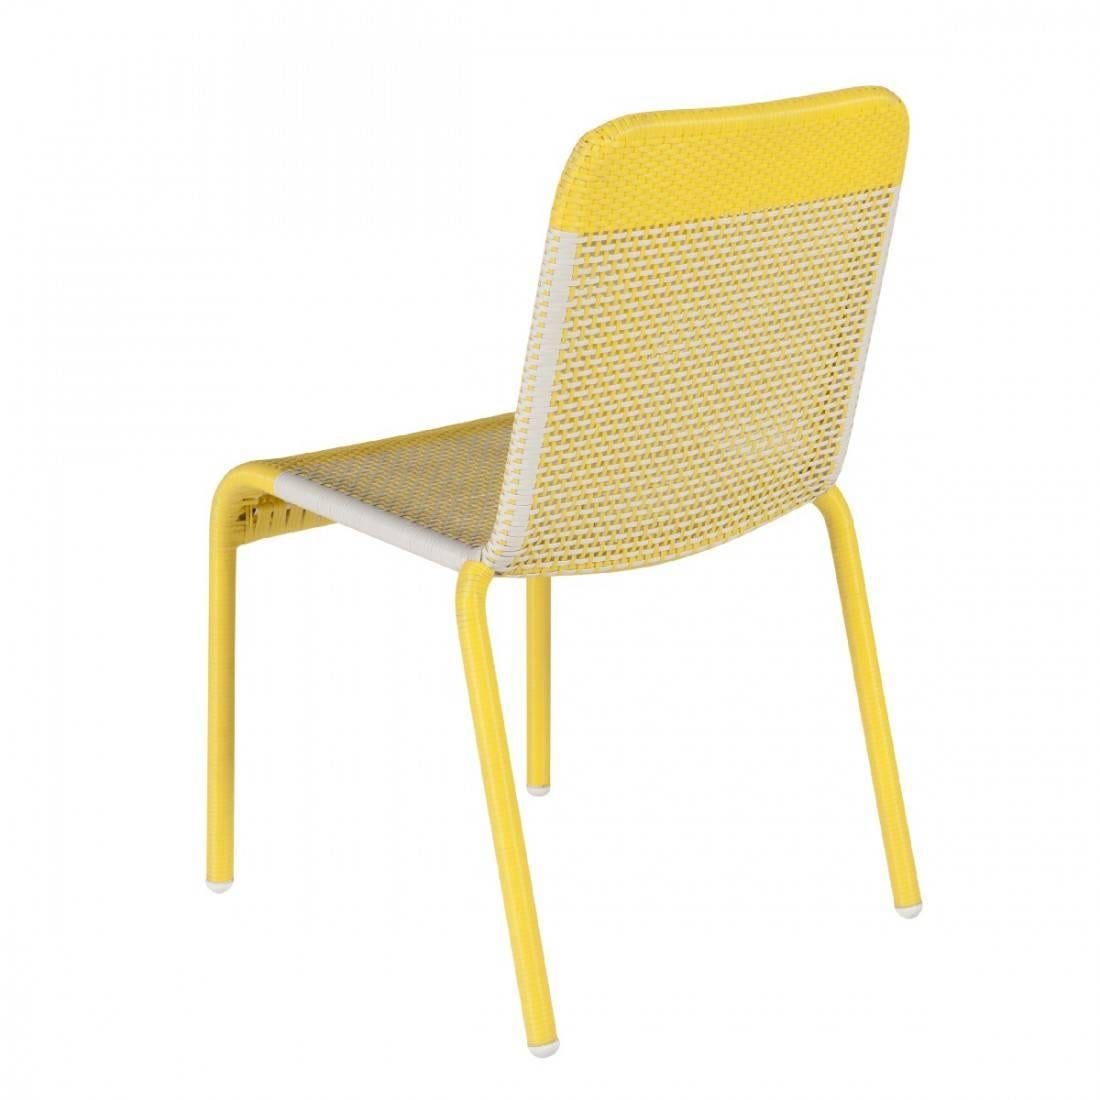 Set of six yellow braided resin chairs indoor/outdoor. Design and retro style, practical (stackable!) They will be perfect on your terrace, in your veranda, around the swimming-pool, your winter garden, even around the dining table! Never used.